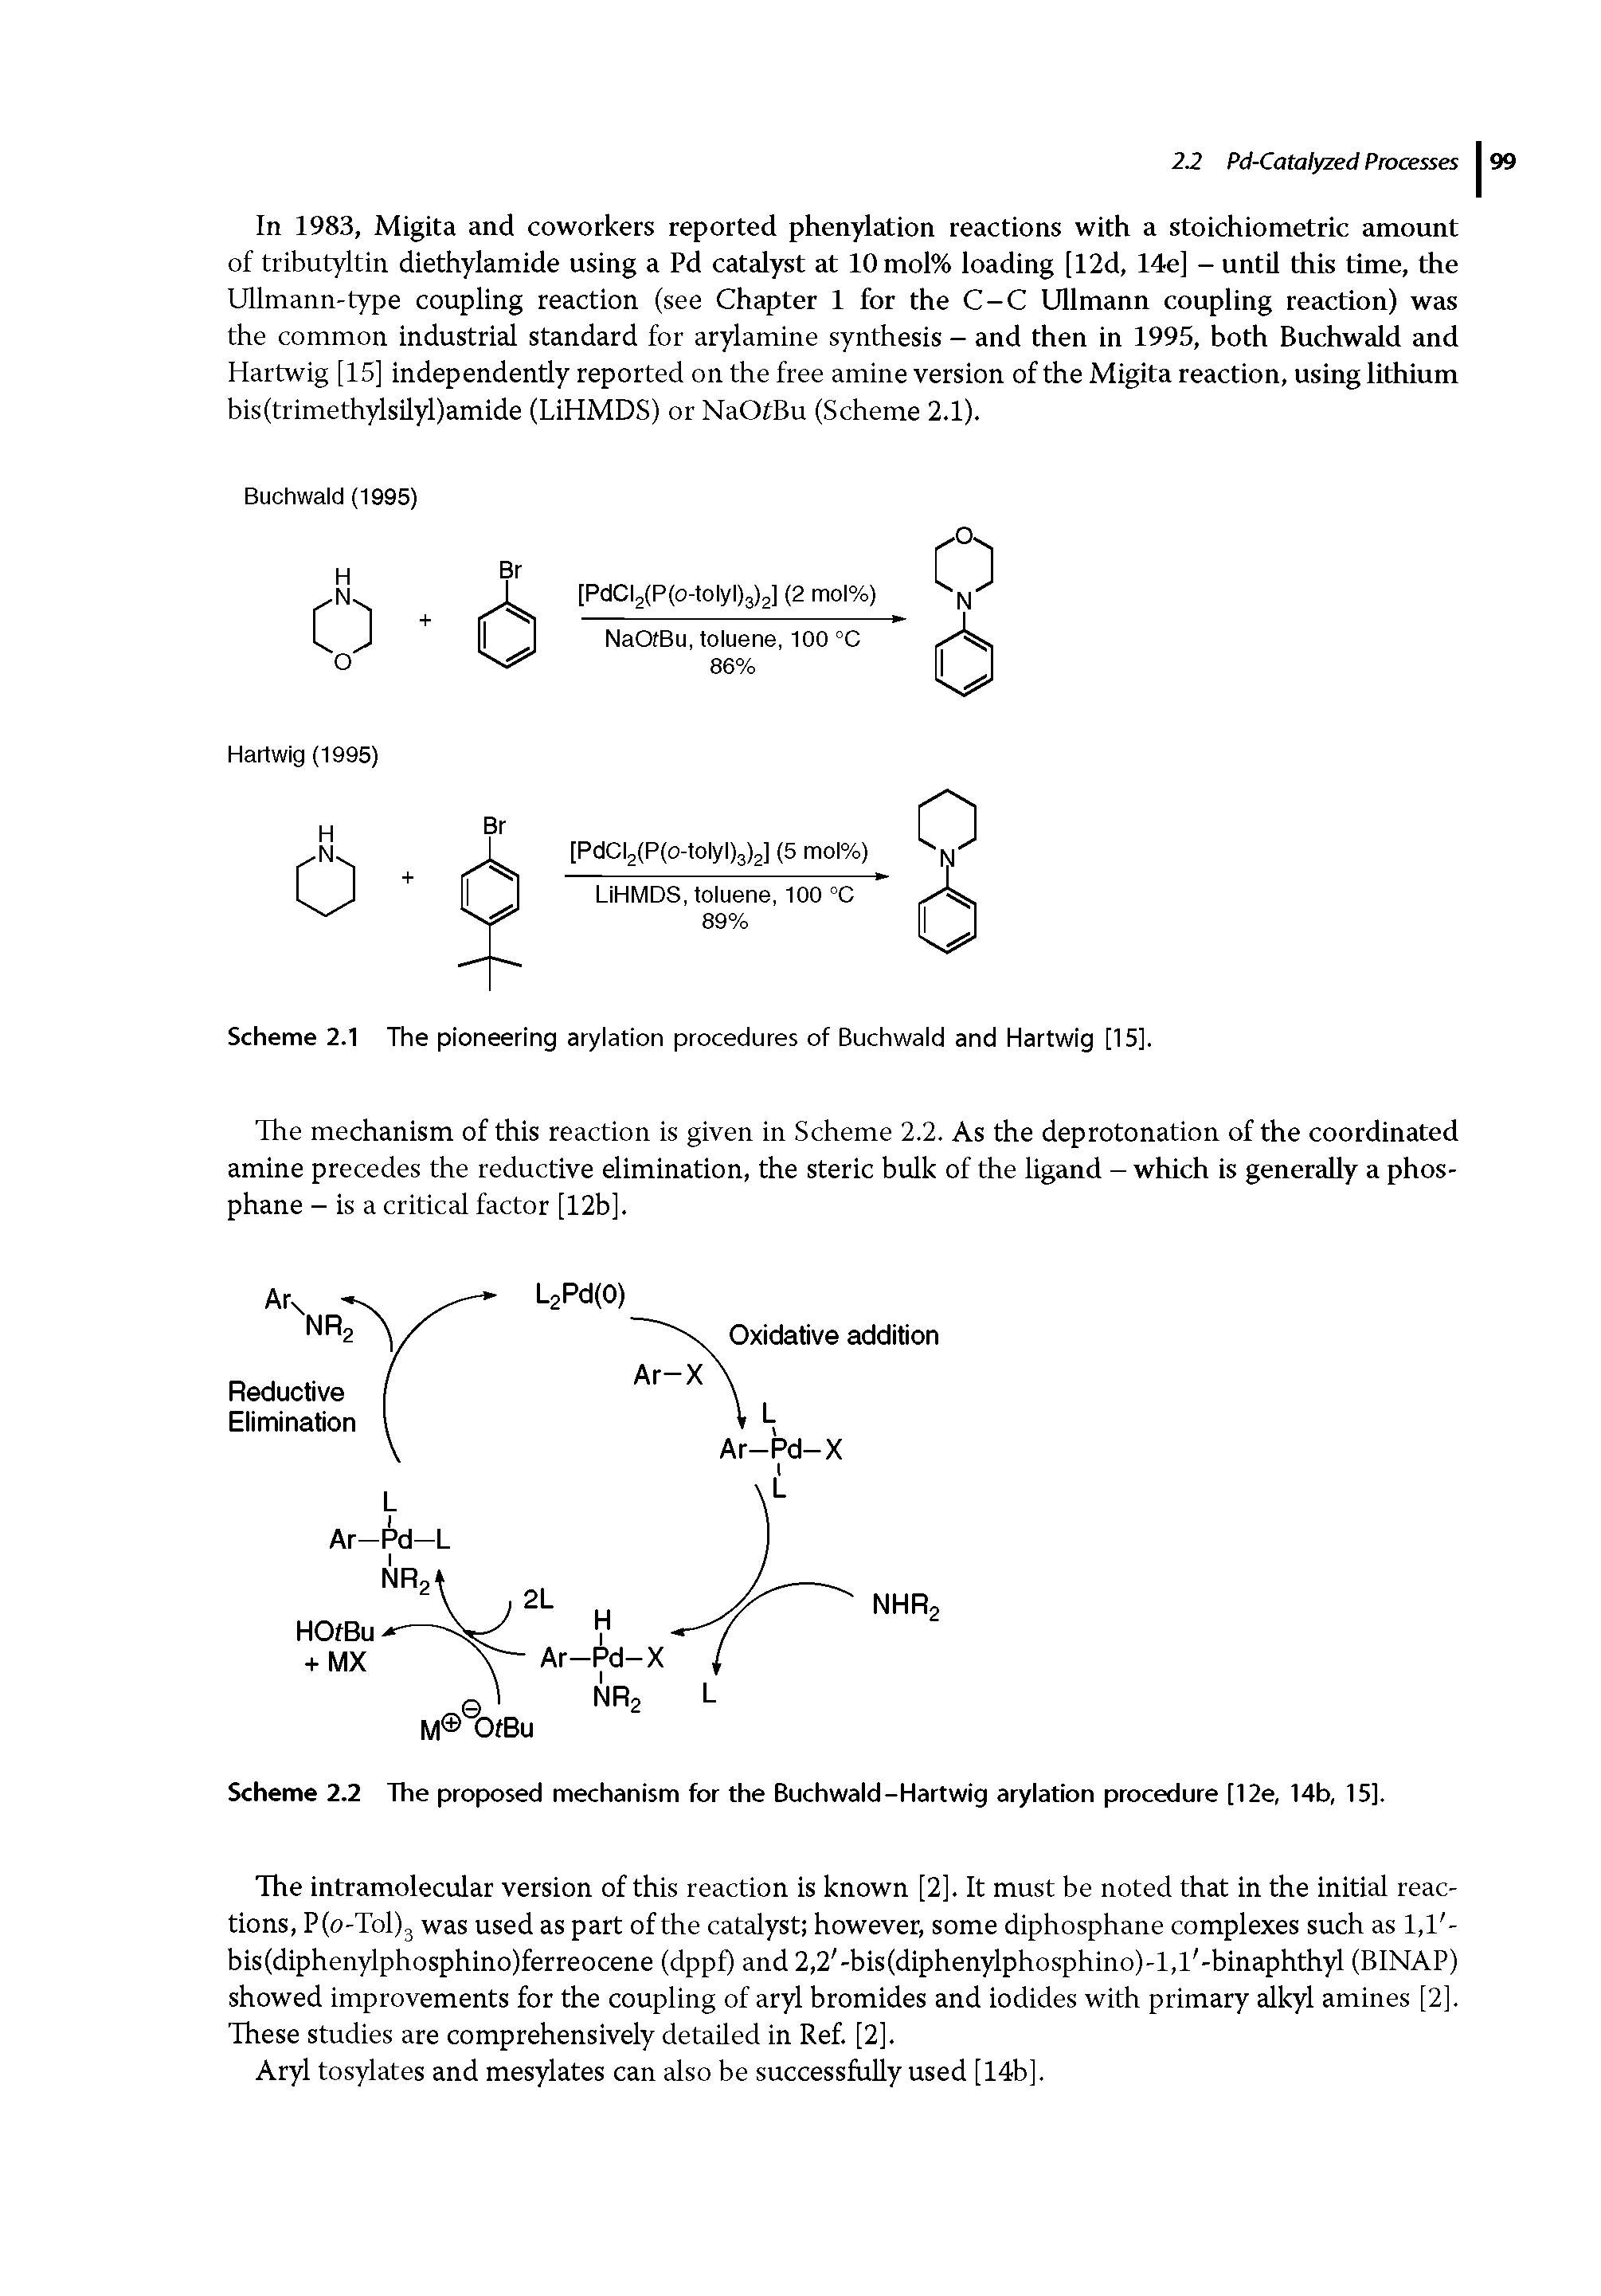 Scheme 2.2 The proposed mechanism for the Buchwald-Hartwig arylation procedure [12e, 14b, 15].